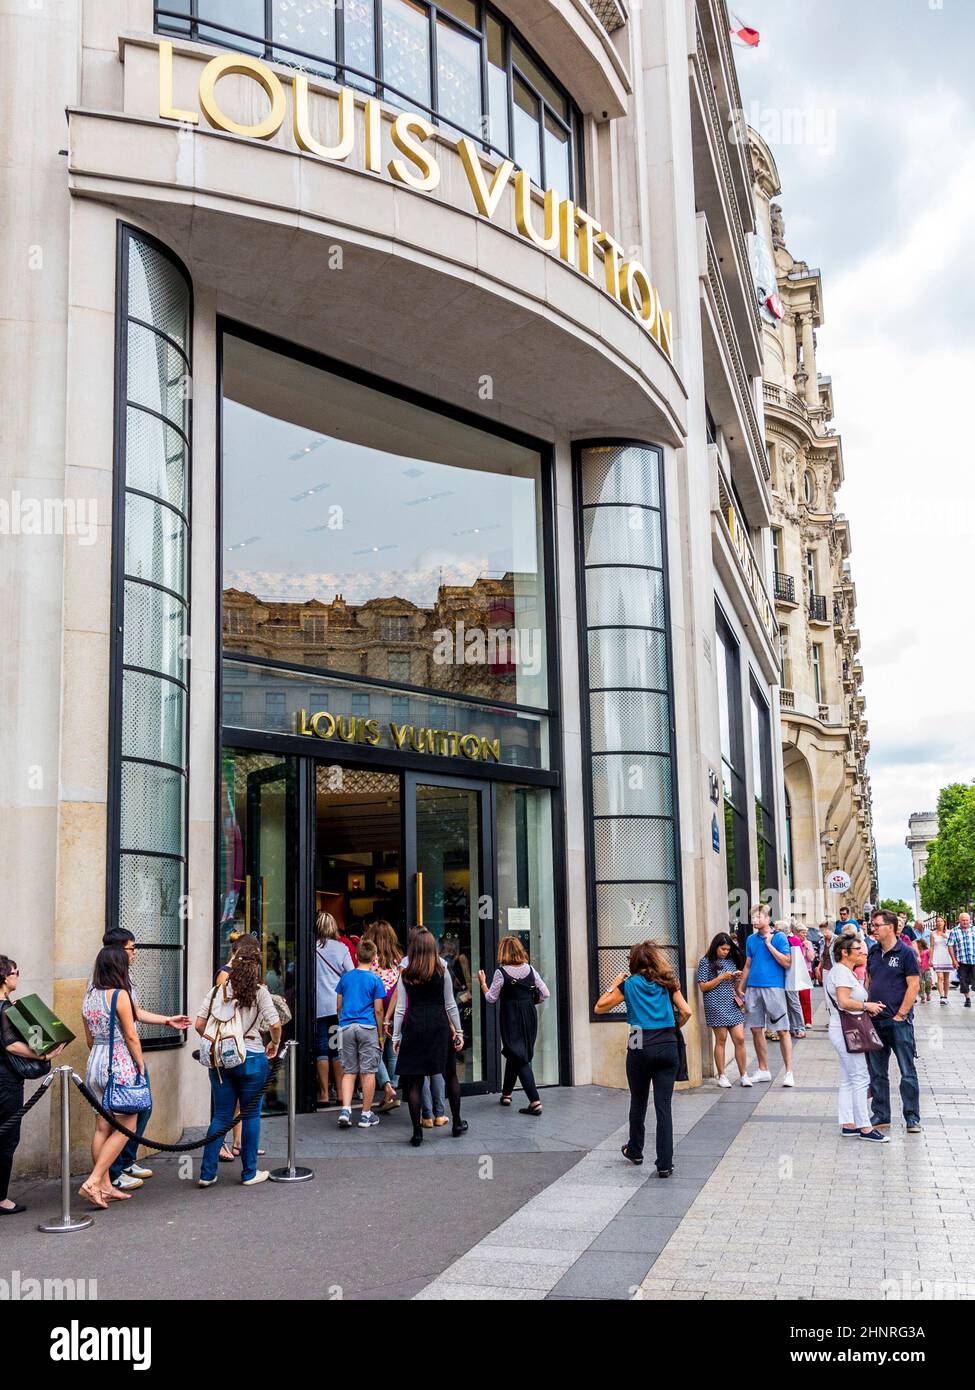 people queue up in front of Louis Vuitton shop Stock Photo